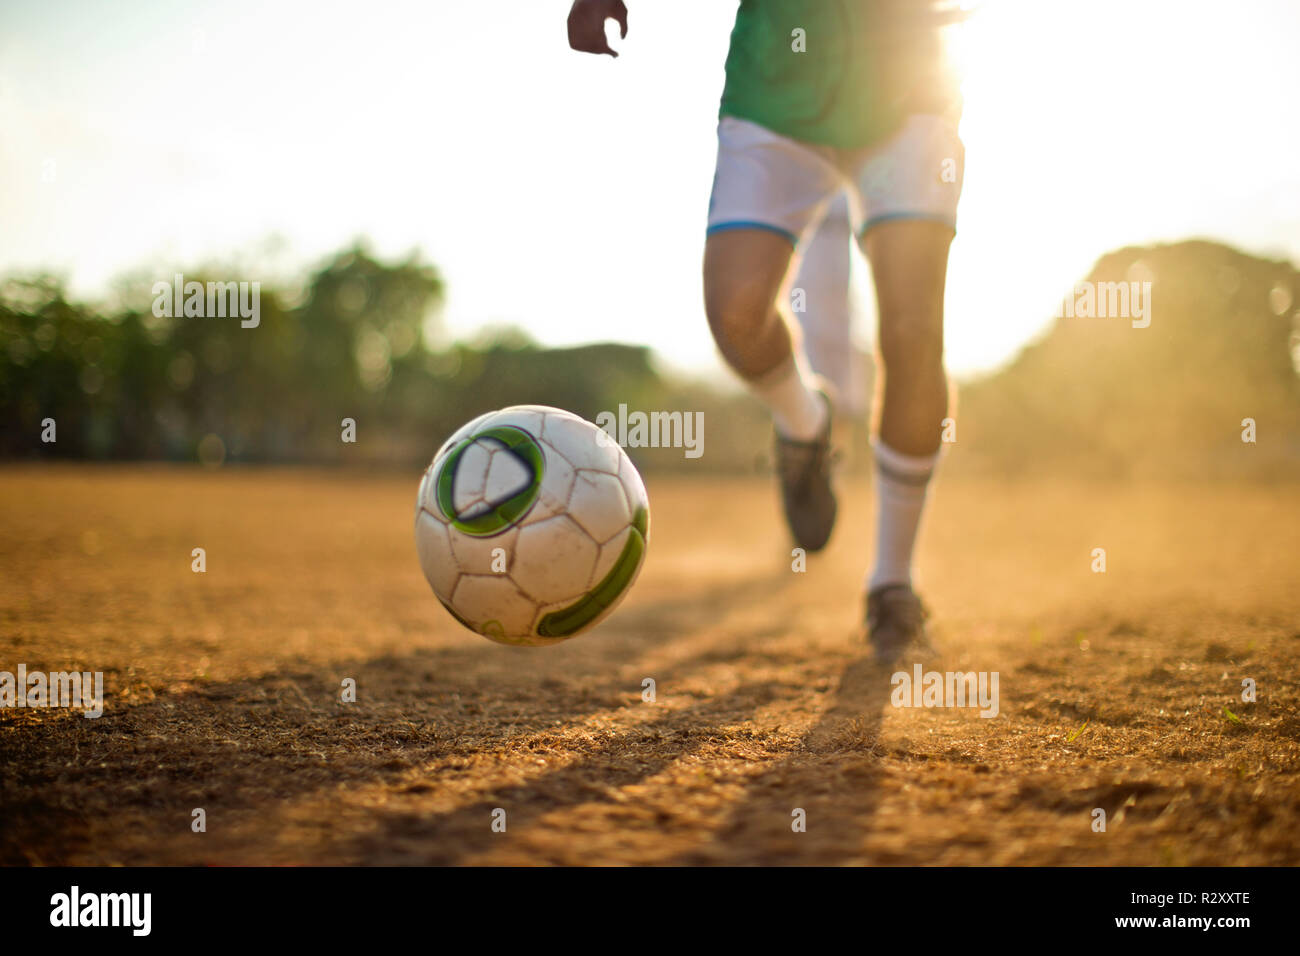 Soccer player chasing a bouncing soccer ball while playing on a dusty sports field. Stock Photo